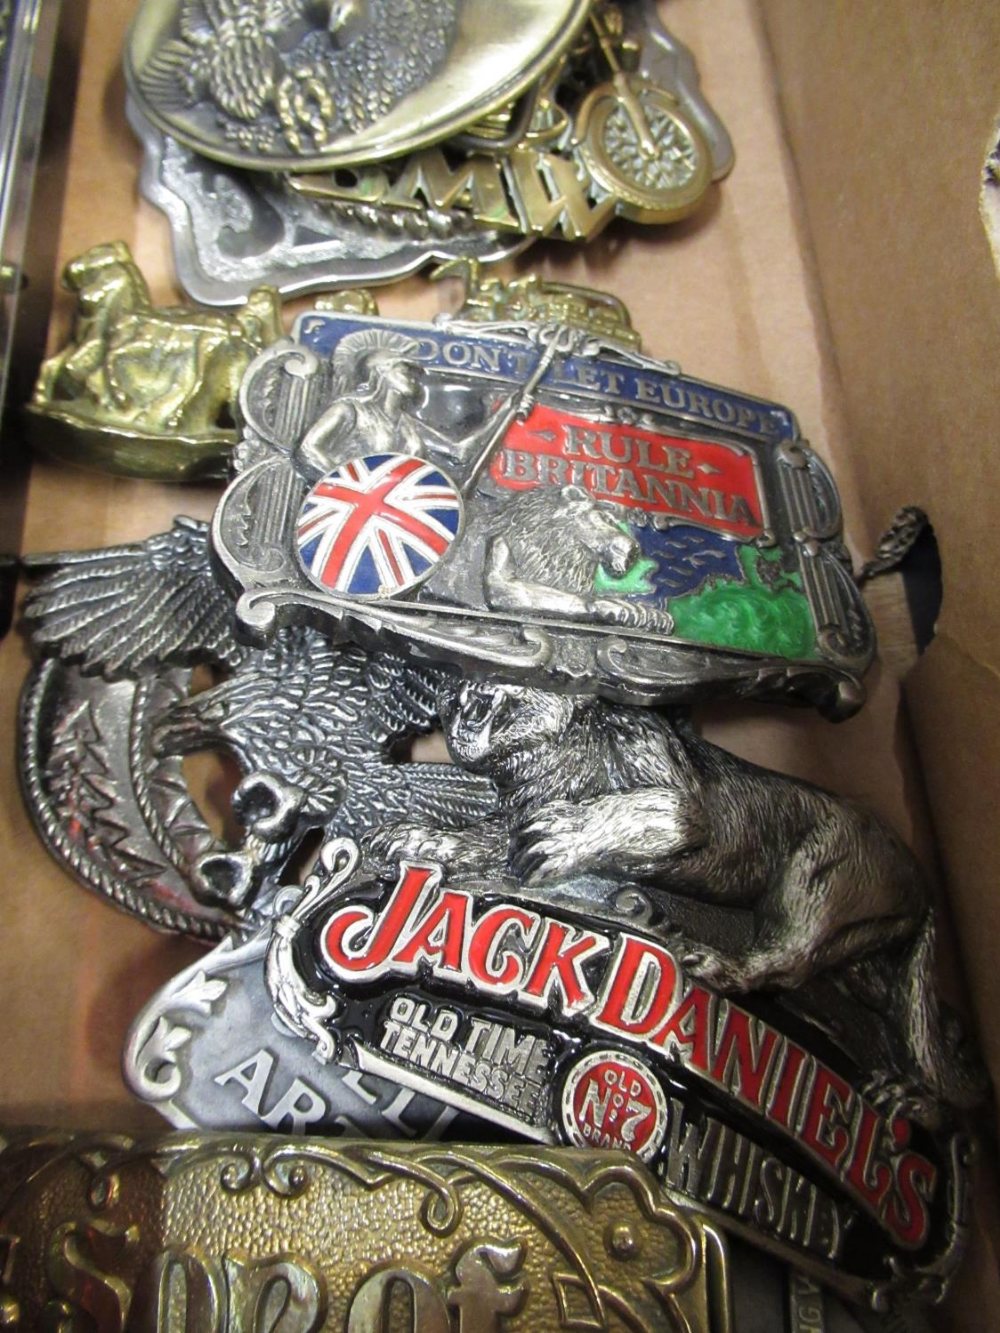 Harley Davidson motorcycles belt buckles, other belt buckles, two promotional baseball type caps, - Image 2 of 3